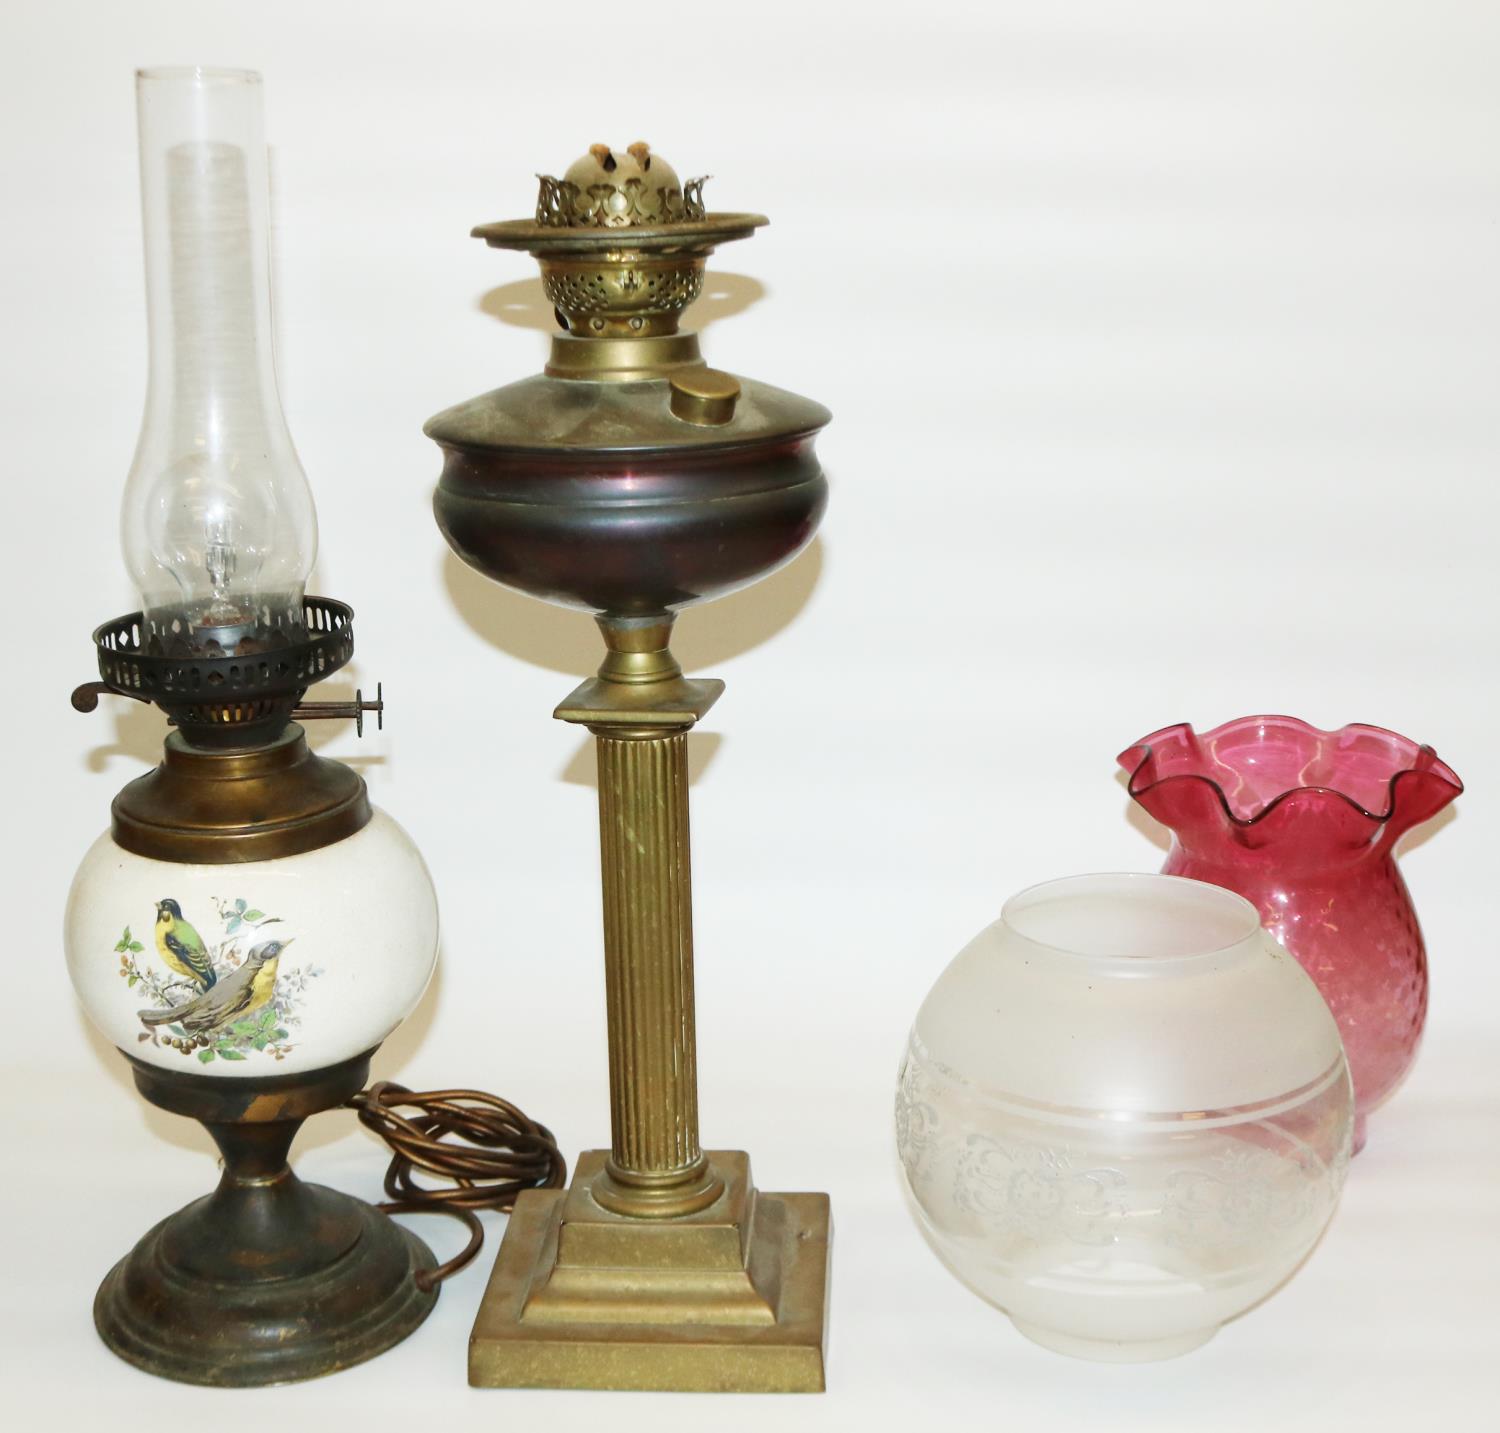 Two early 20th century oil lamps: one converted to electric, with ceramic body decorated with birds,